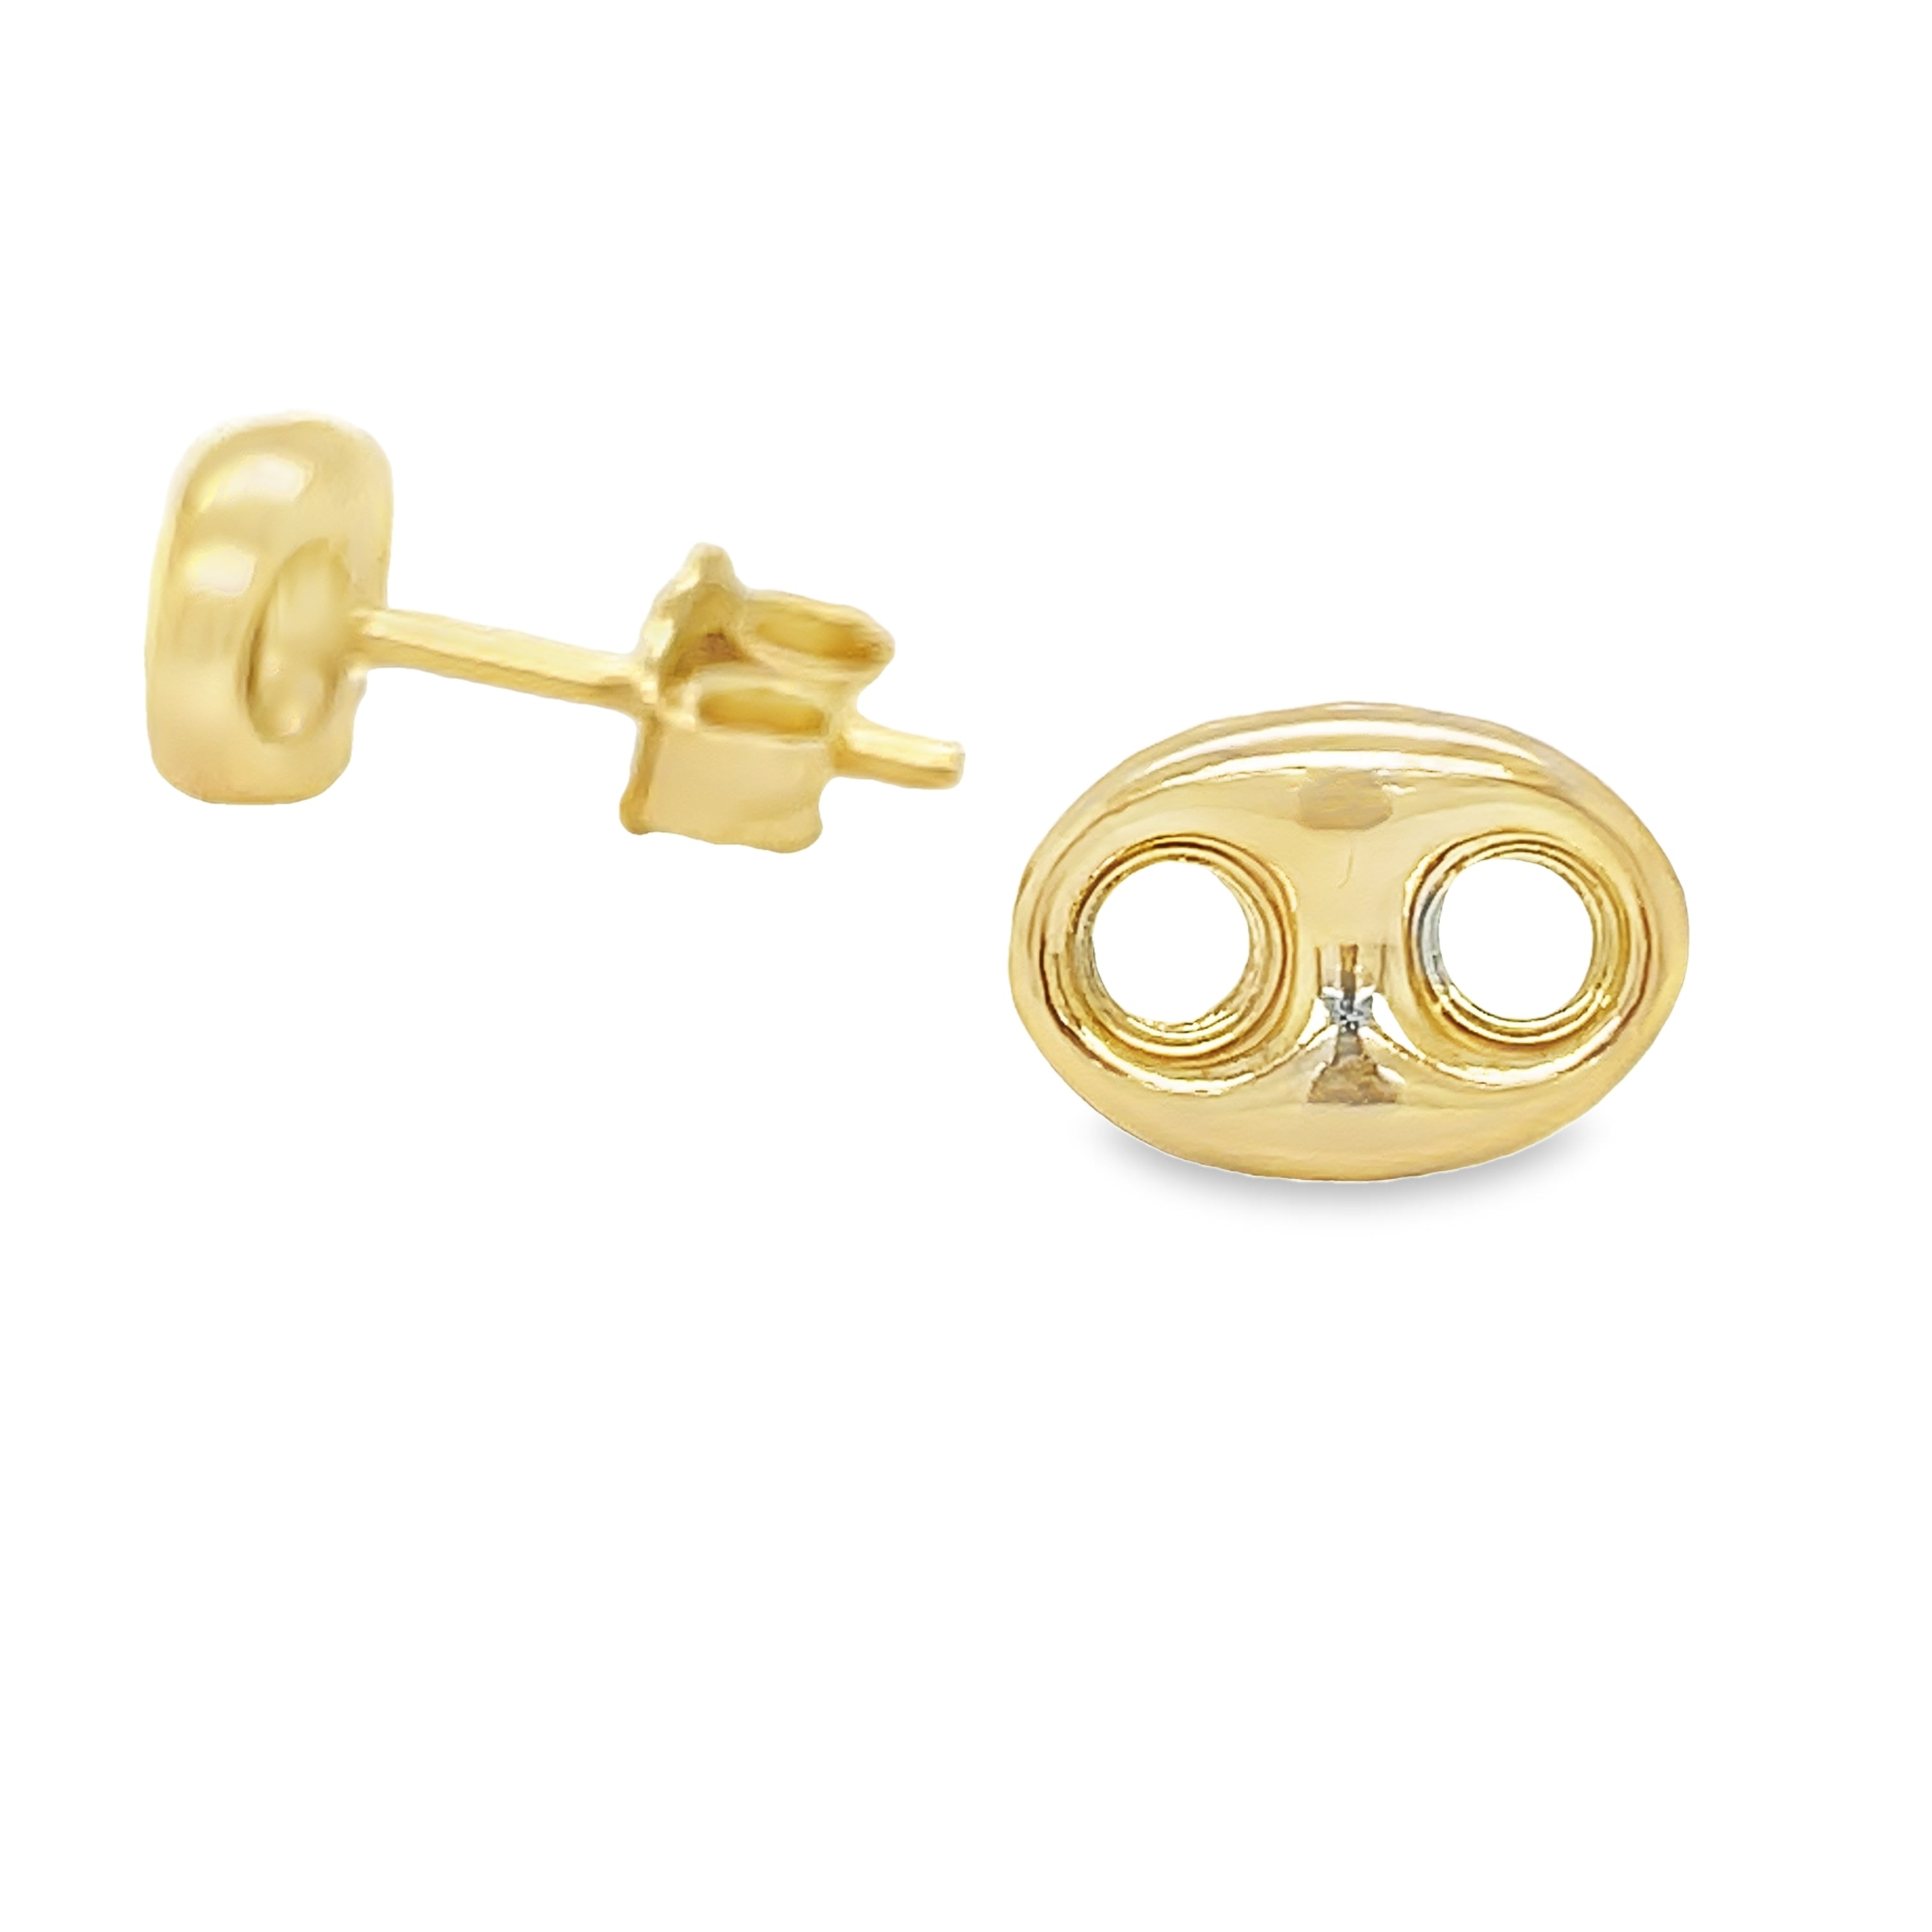 Elevate your style with these luxurious 14k yellow gold puffed mariner link earrings. Made in Italy with a secure friction back, the stylish mariner link design adds a touch of sophistication. At 10.00mm, these earrings are the perfect size to make a statement without being too heavy. Elevate your everyday style with these elegant and versatile earrings.